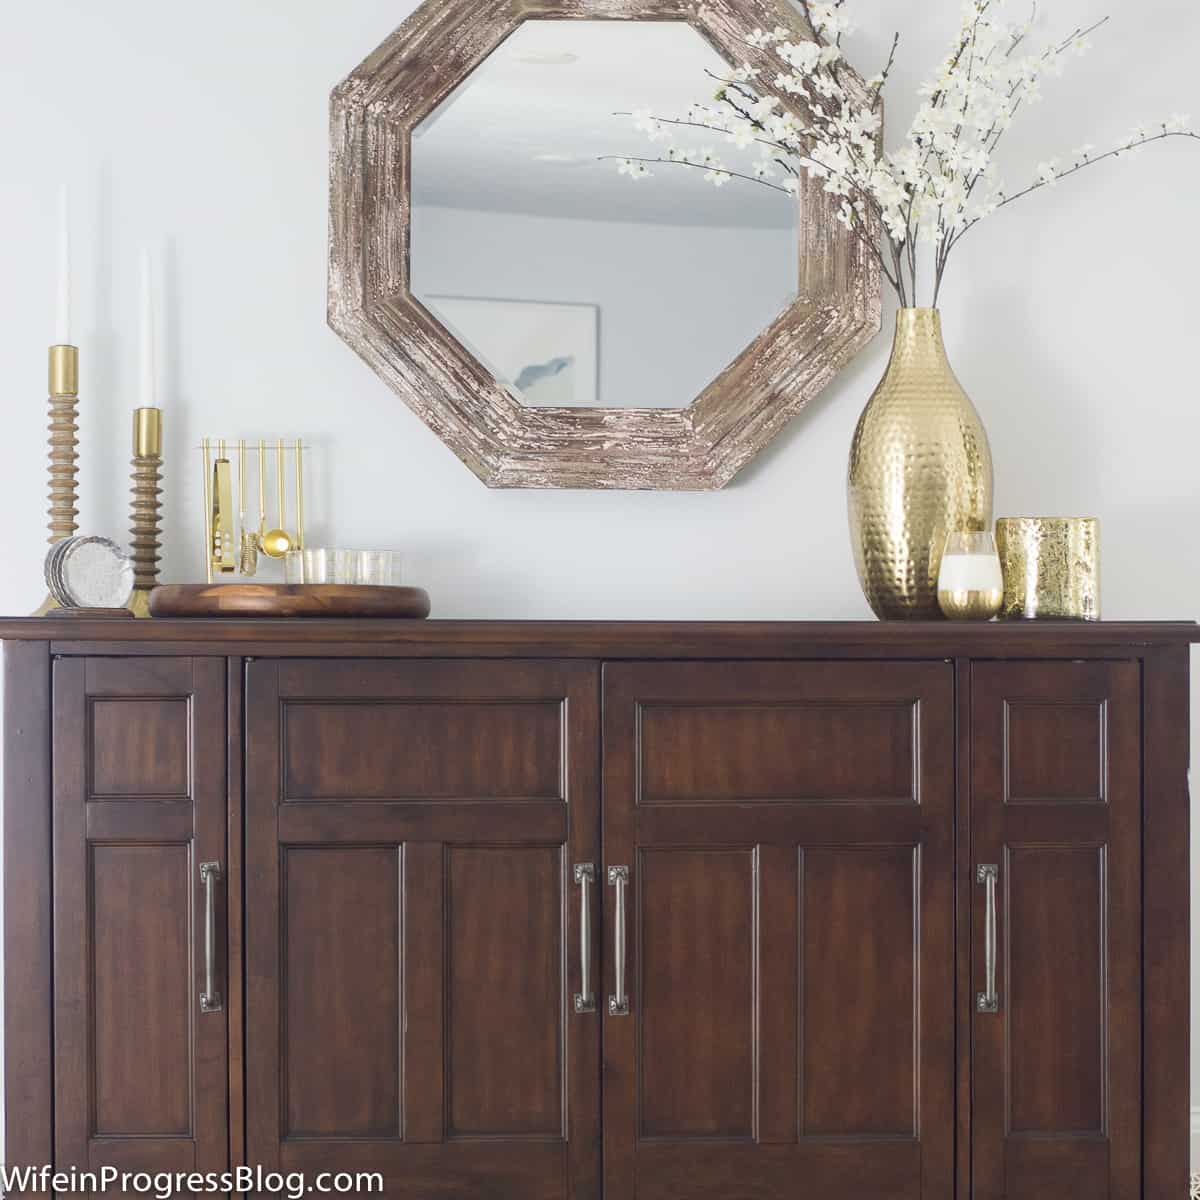 A large side table with various gold decor items on top and a hexagonal mirror above in a rustic, wood frame